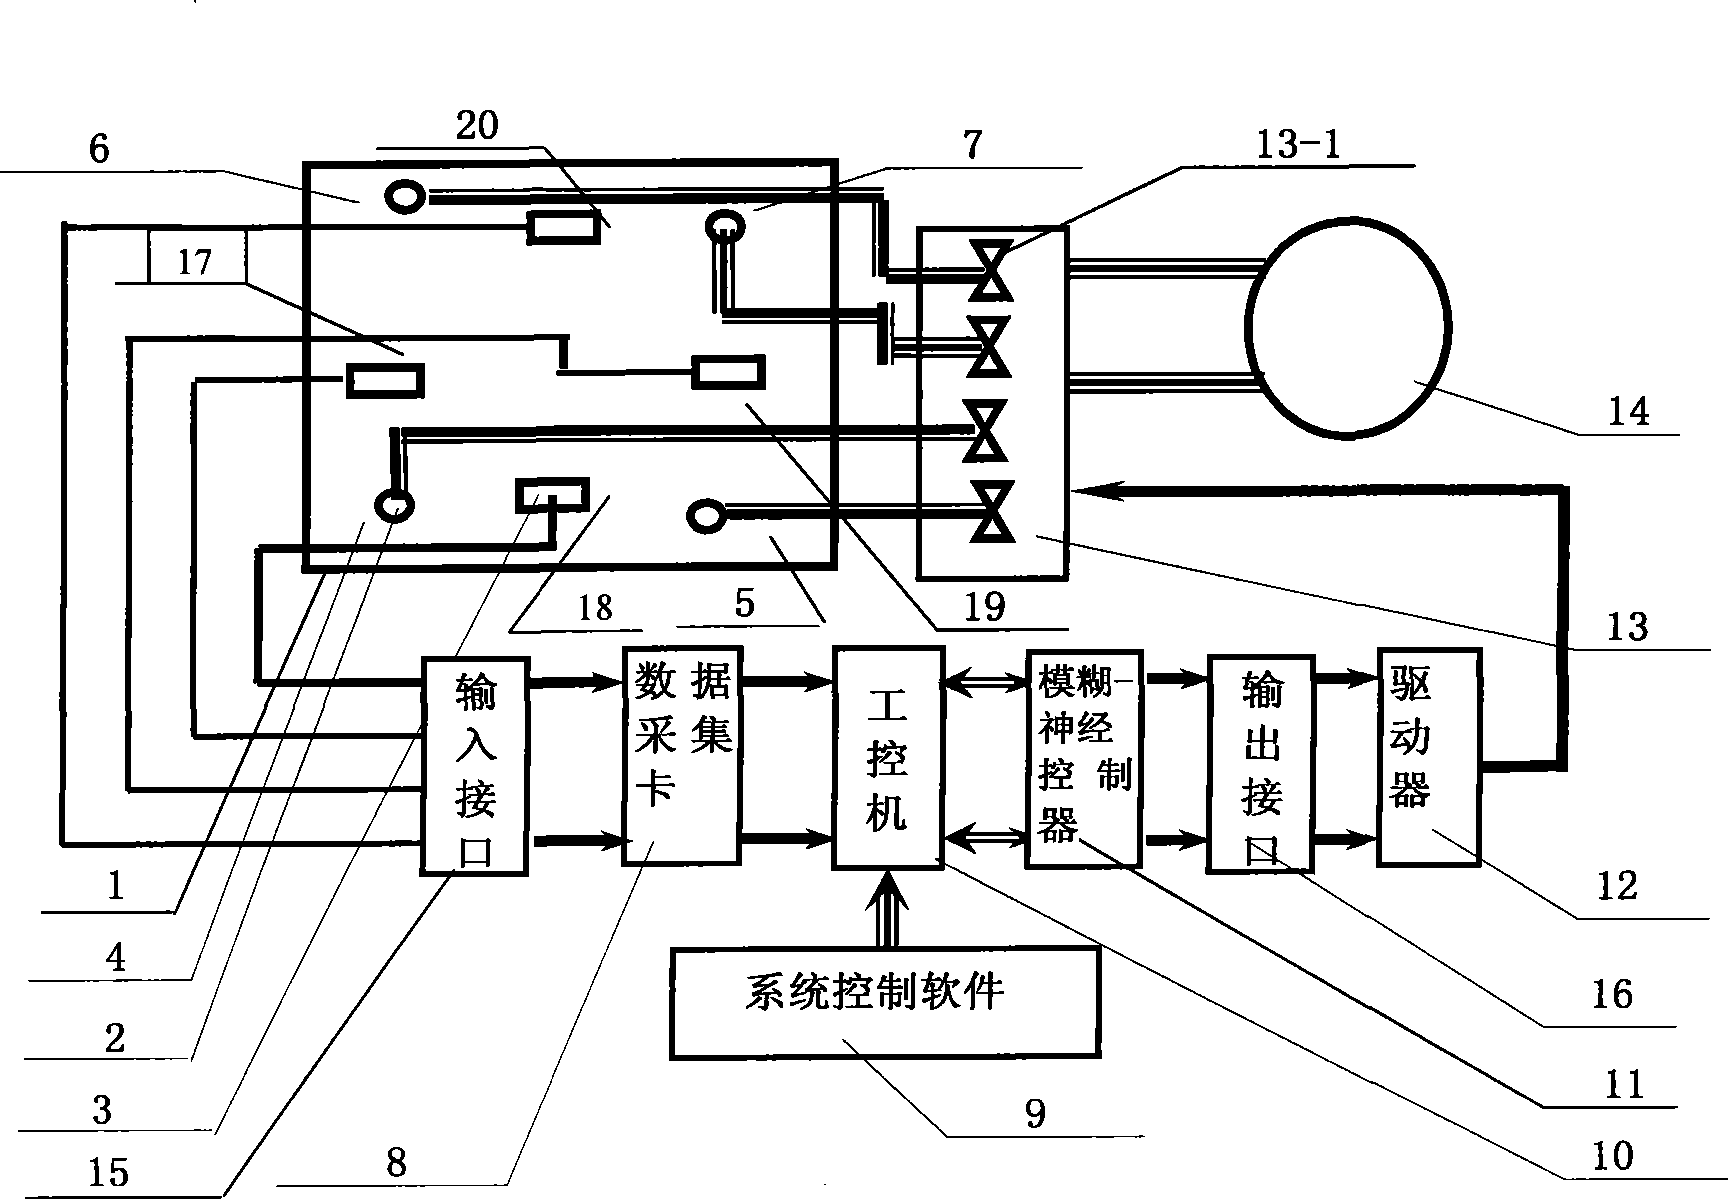 Multi-point sensing and intelligent control method for temperature of gas heating stove